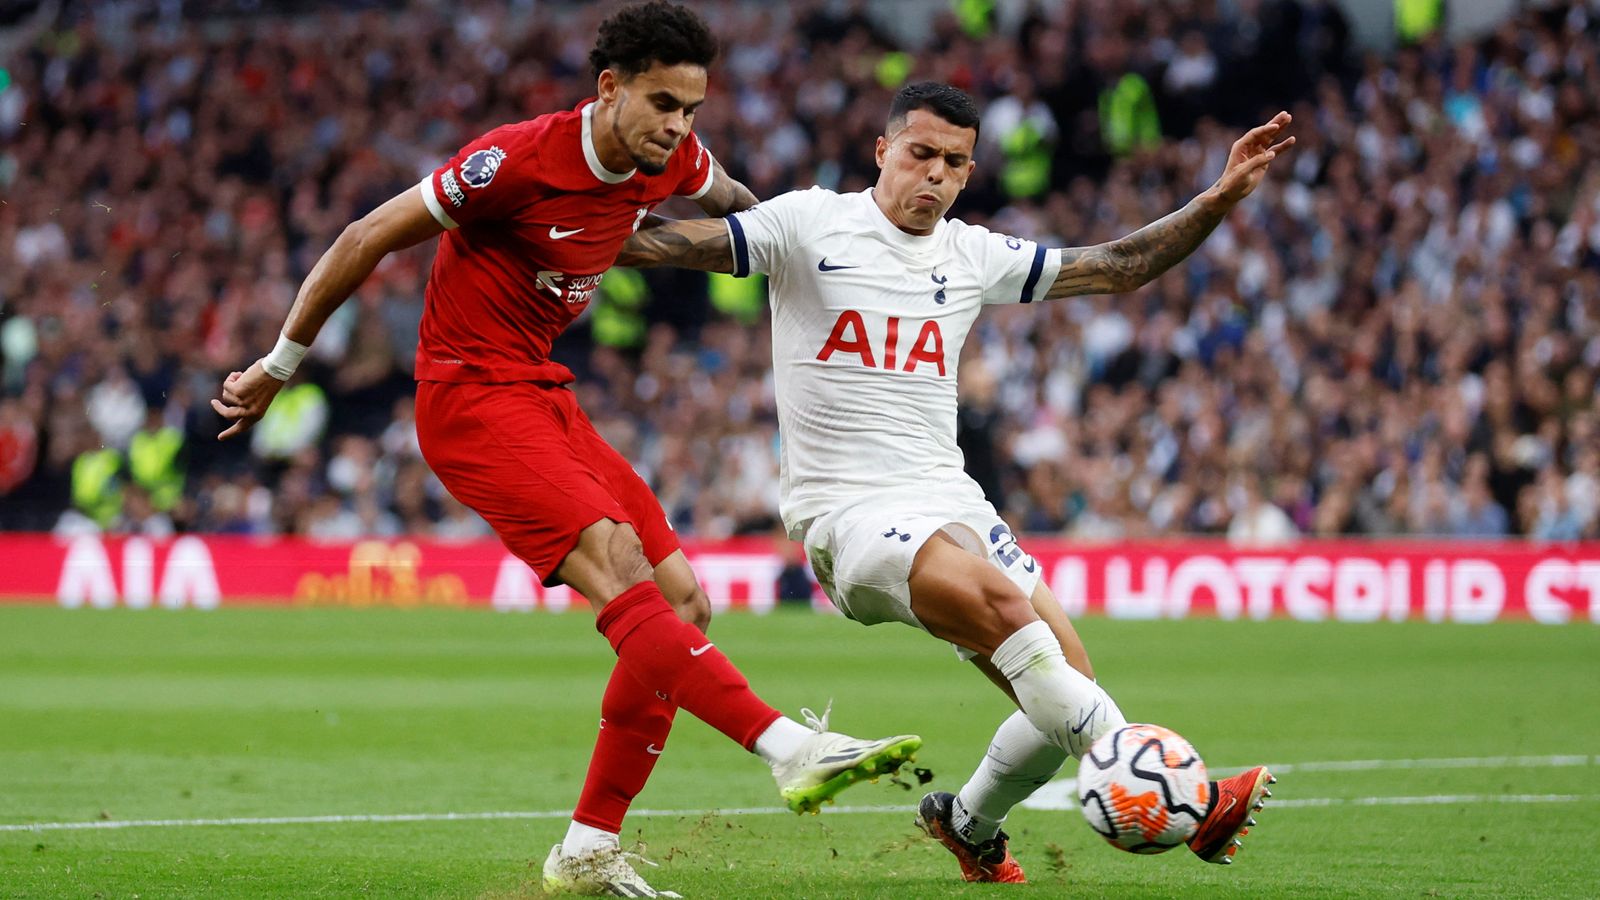 VAR audio of Liverpool's wrongly disallowed goal in Spurs defeat released